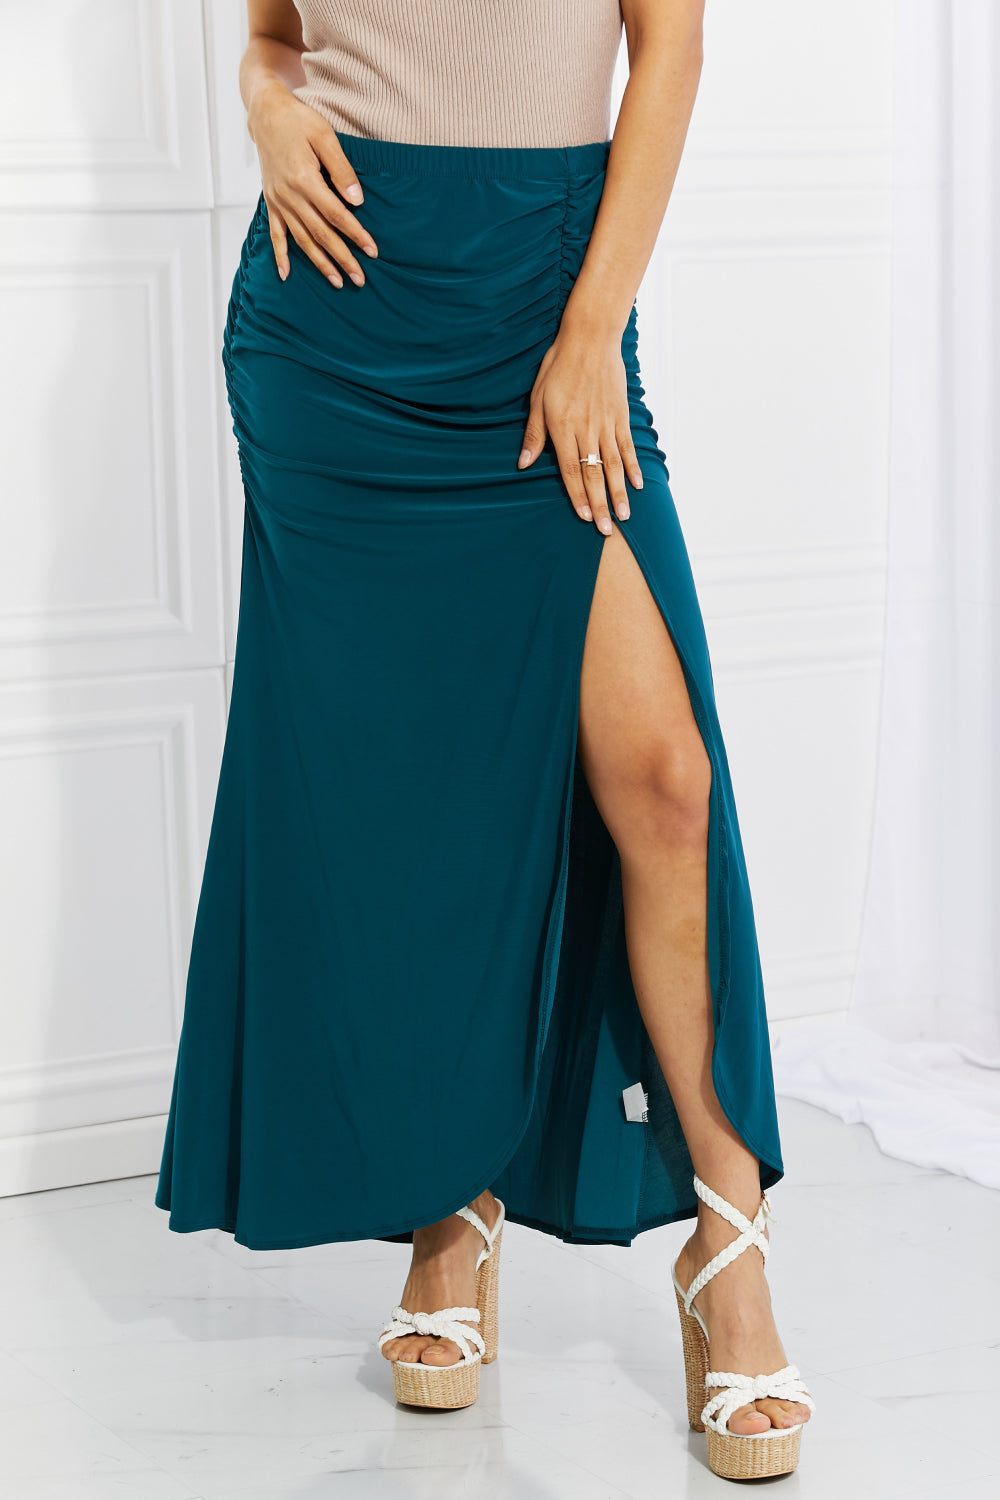 Up and Up Teal Ruched Slit Maxi Skirt